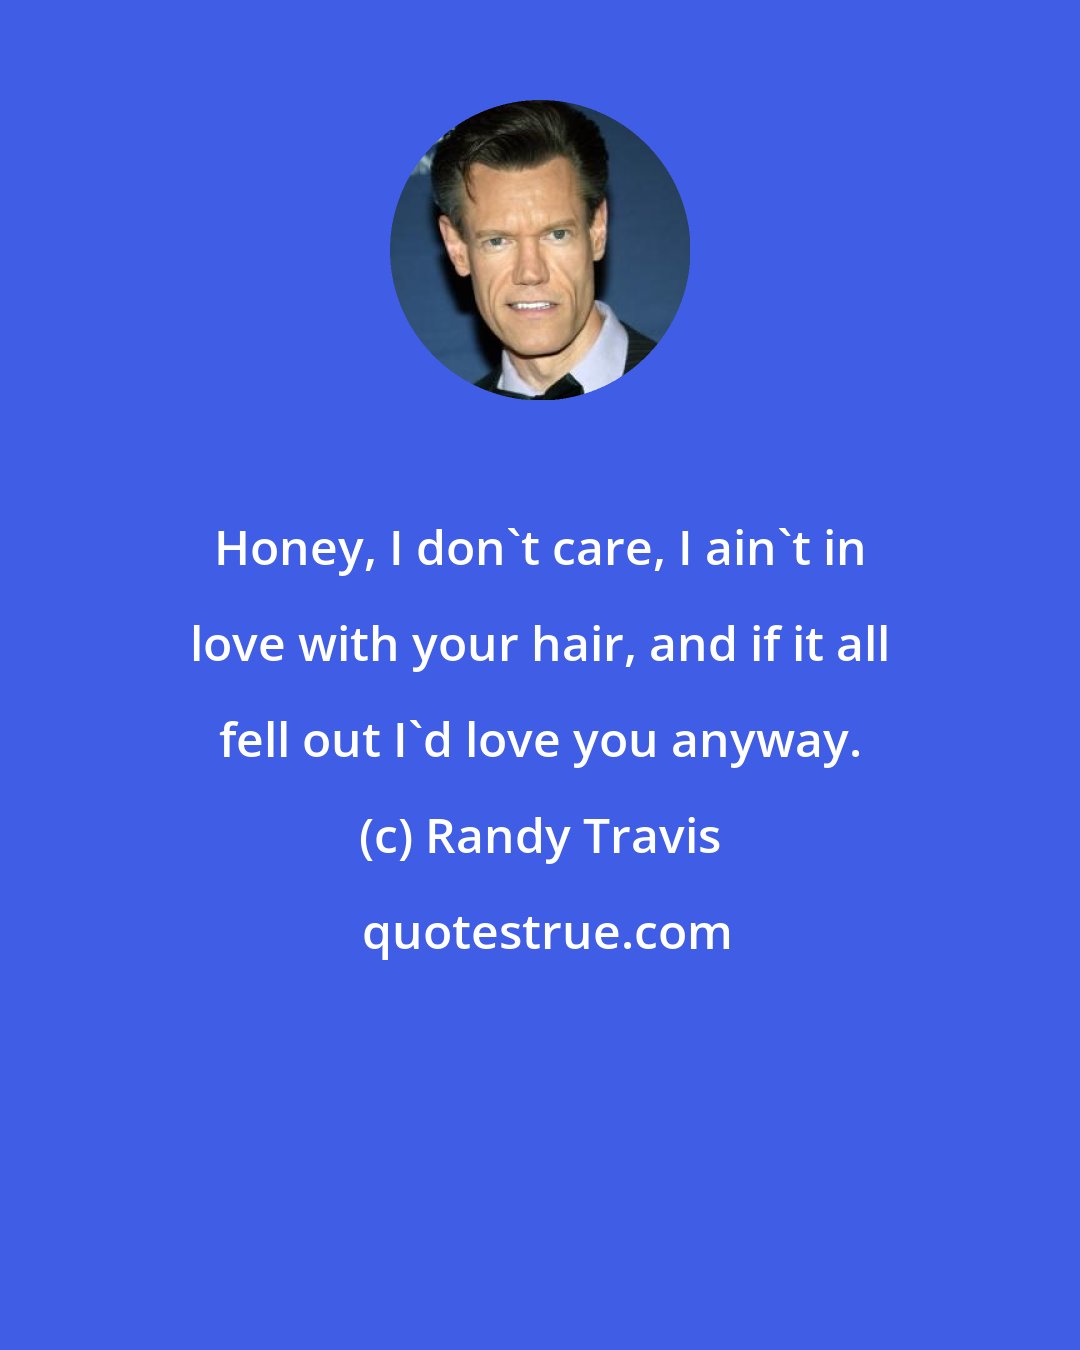 Randy Travis: Honey, I don't care, I ain't in love with your hair, and if it all fell out I'd love you anyway.